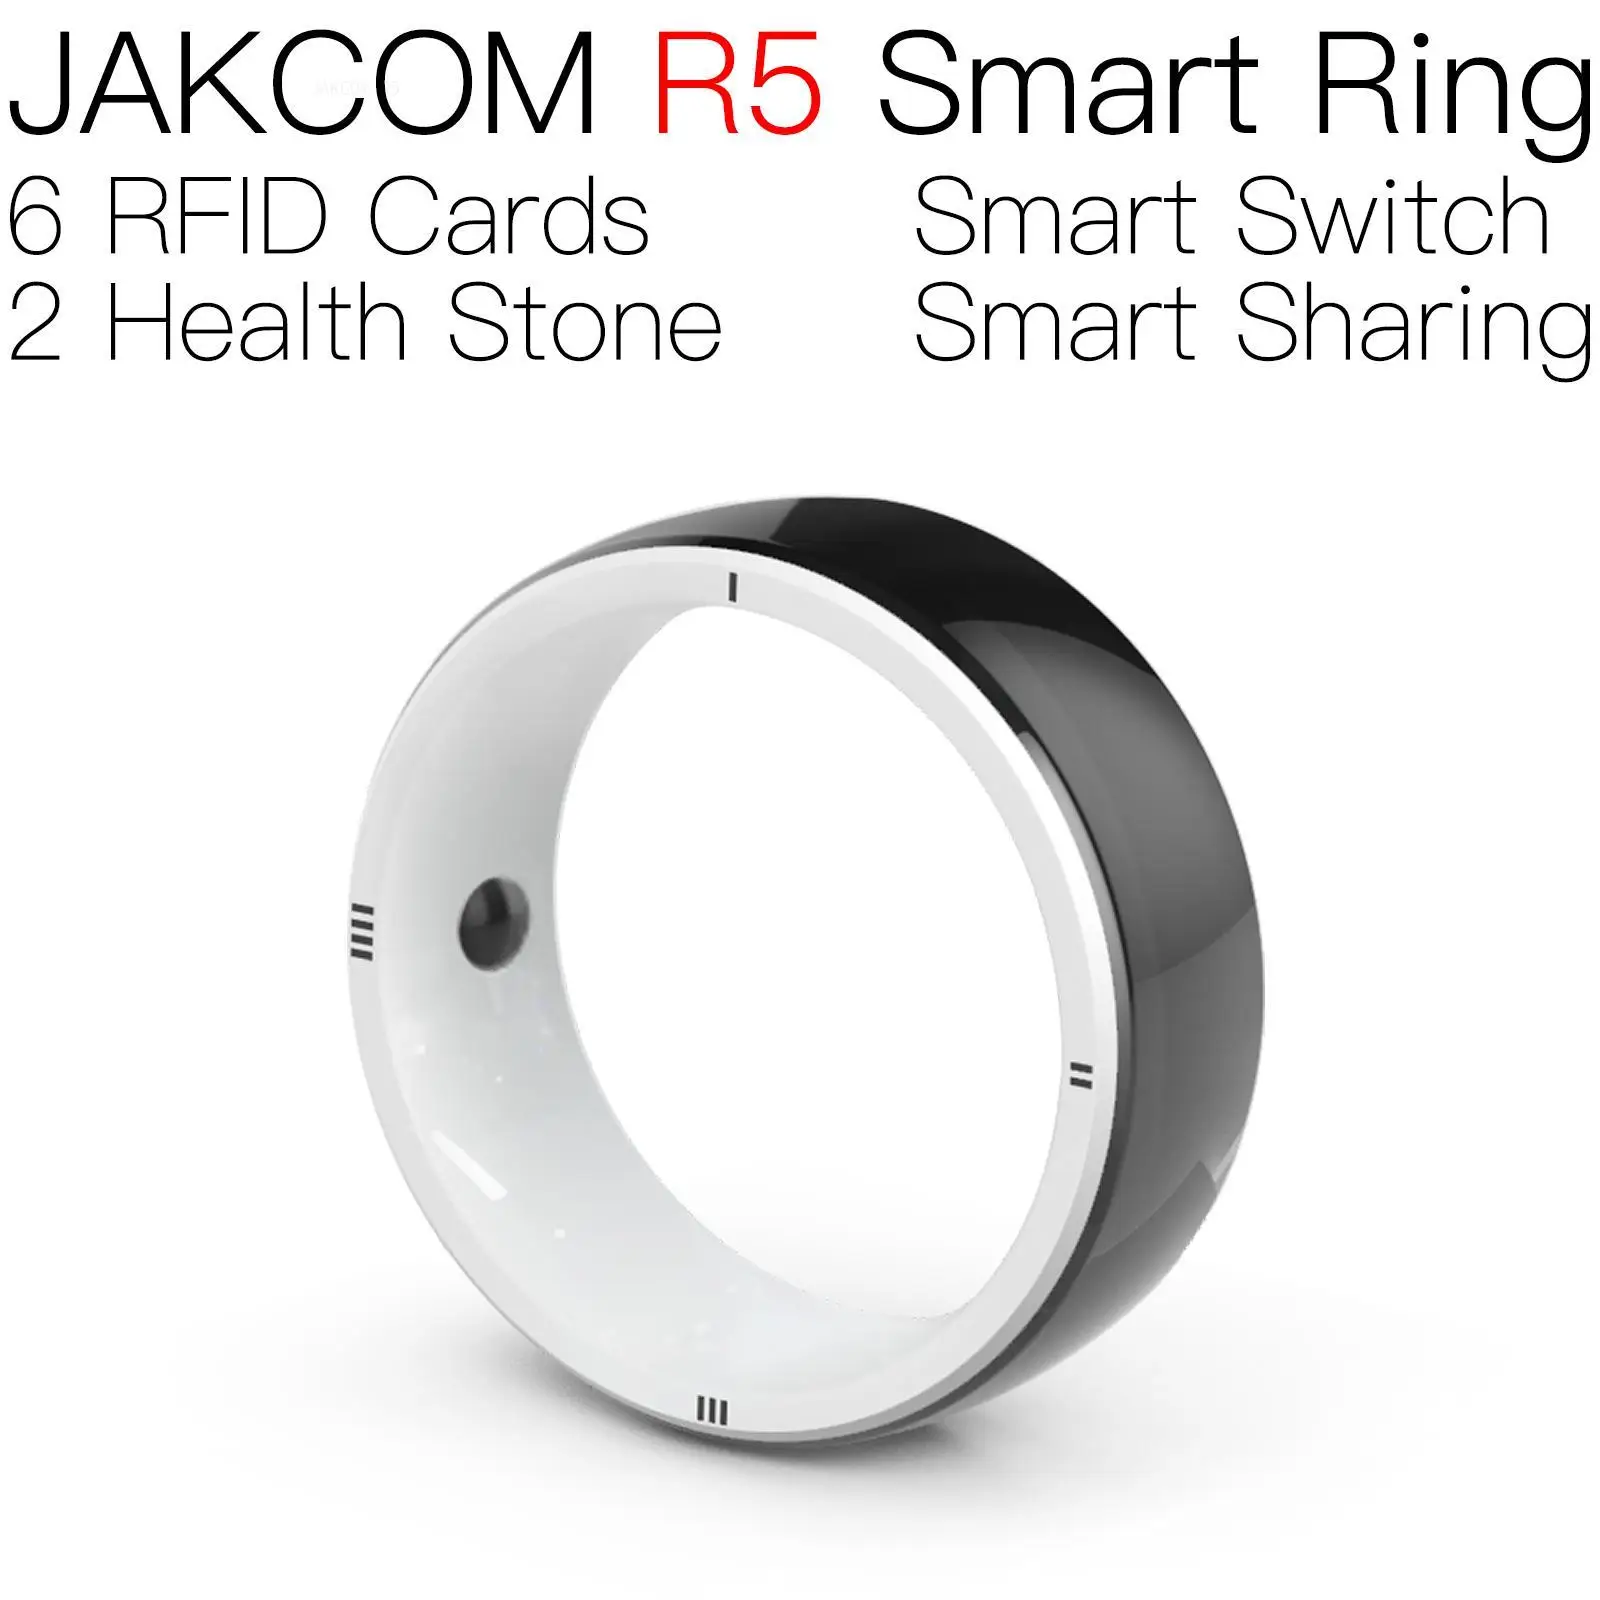 

JAKCOM R5 Smart Ring Nice than uhf rfid tag atex prime 6 months nfc creditcard chip ring pigeon identifier antenna coil